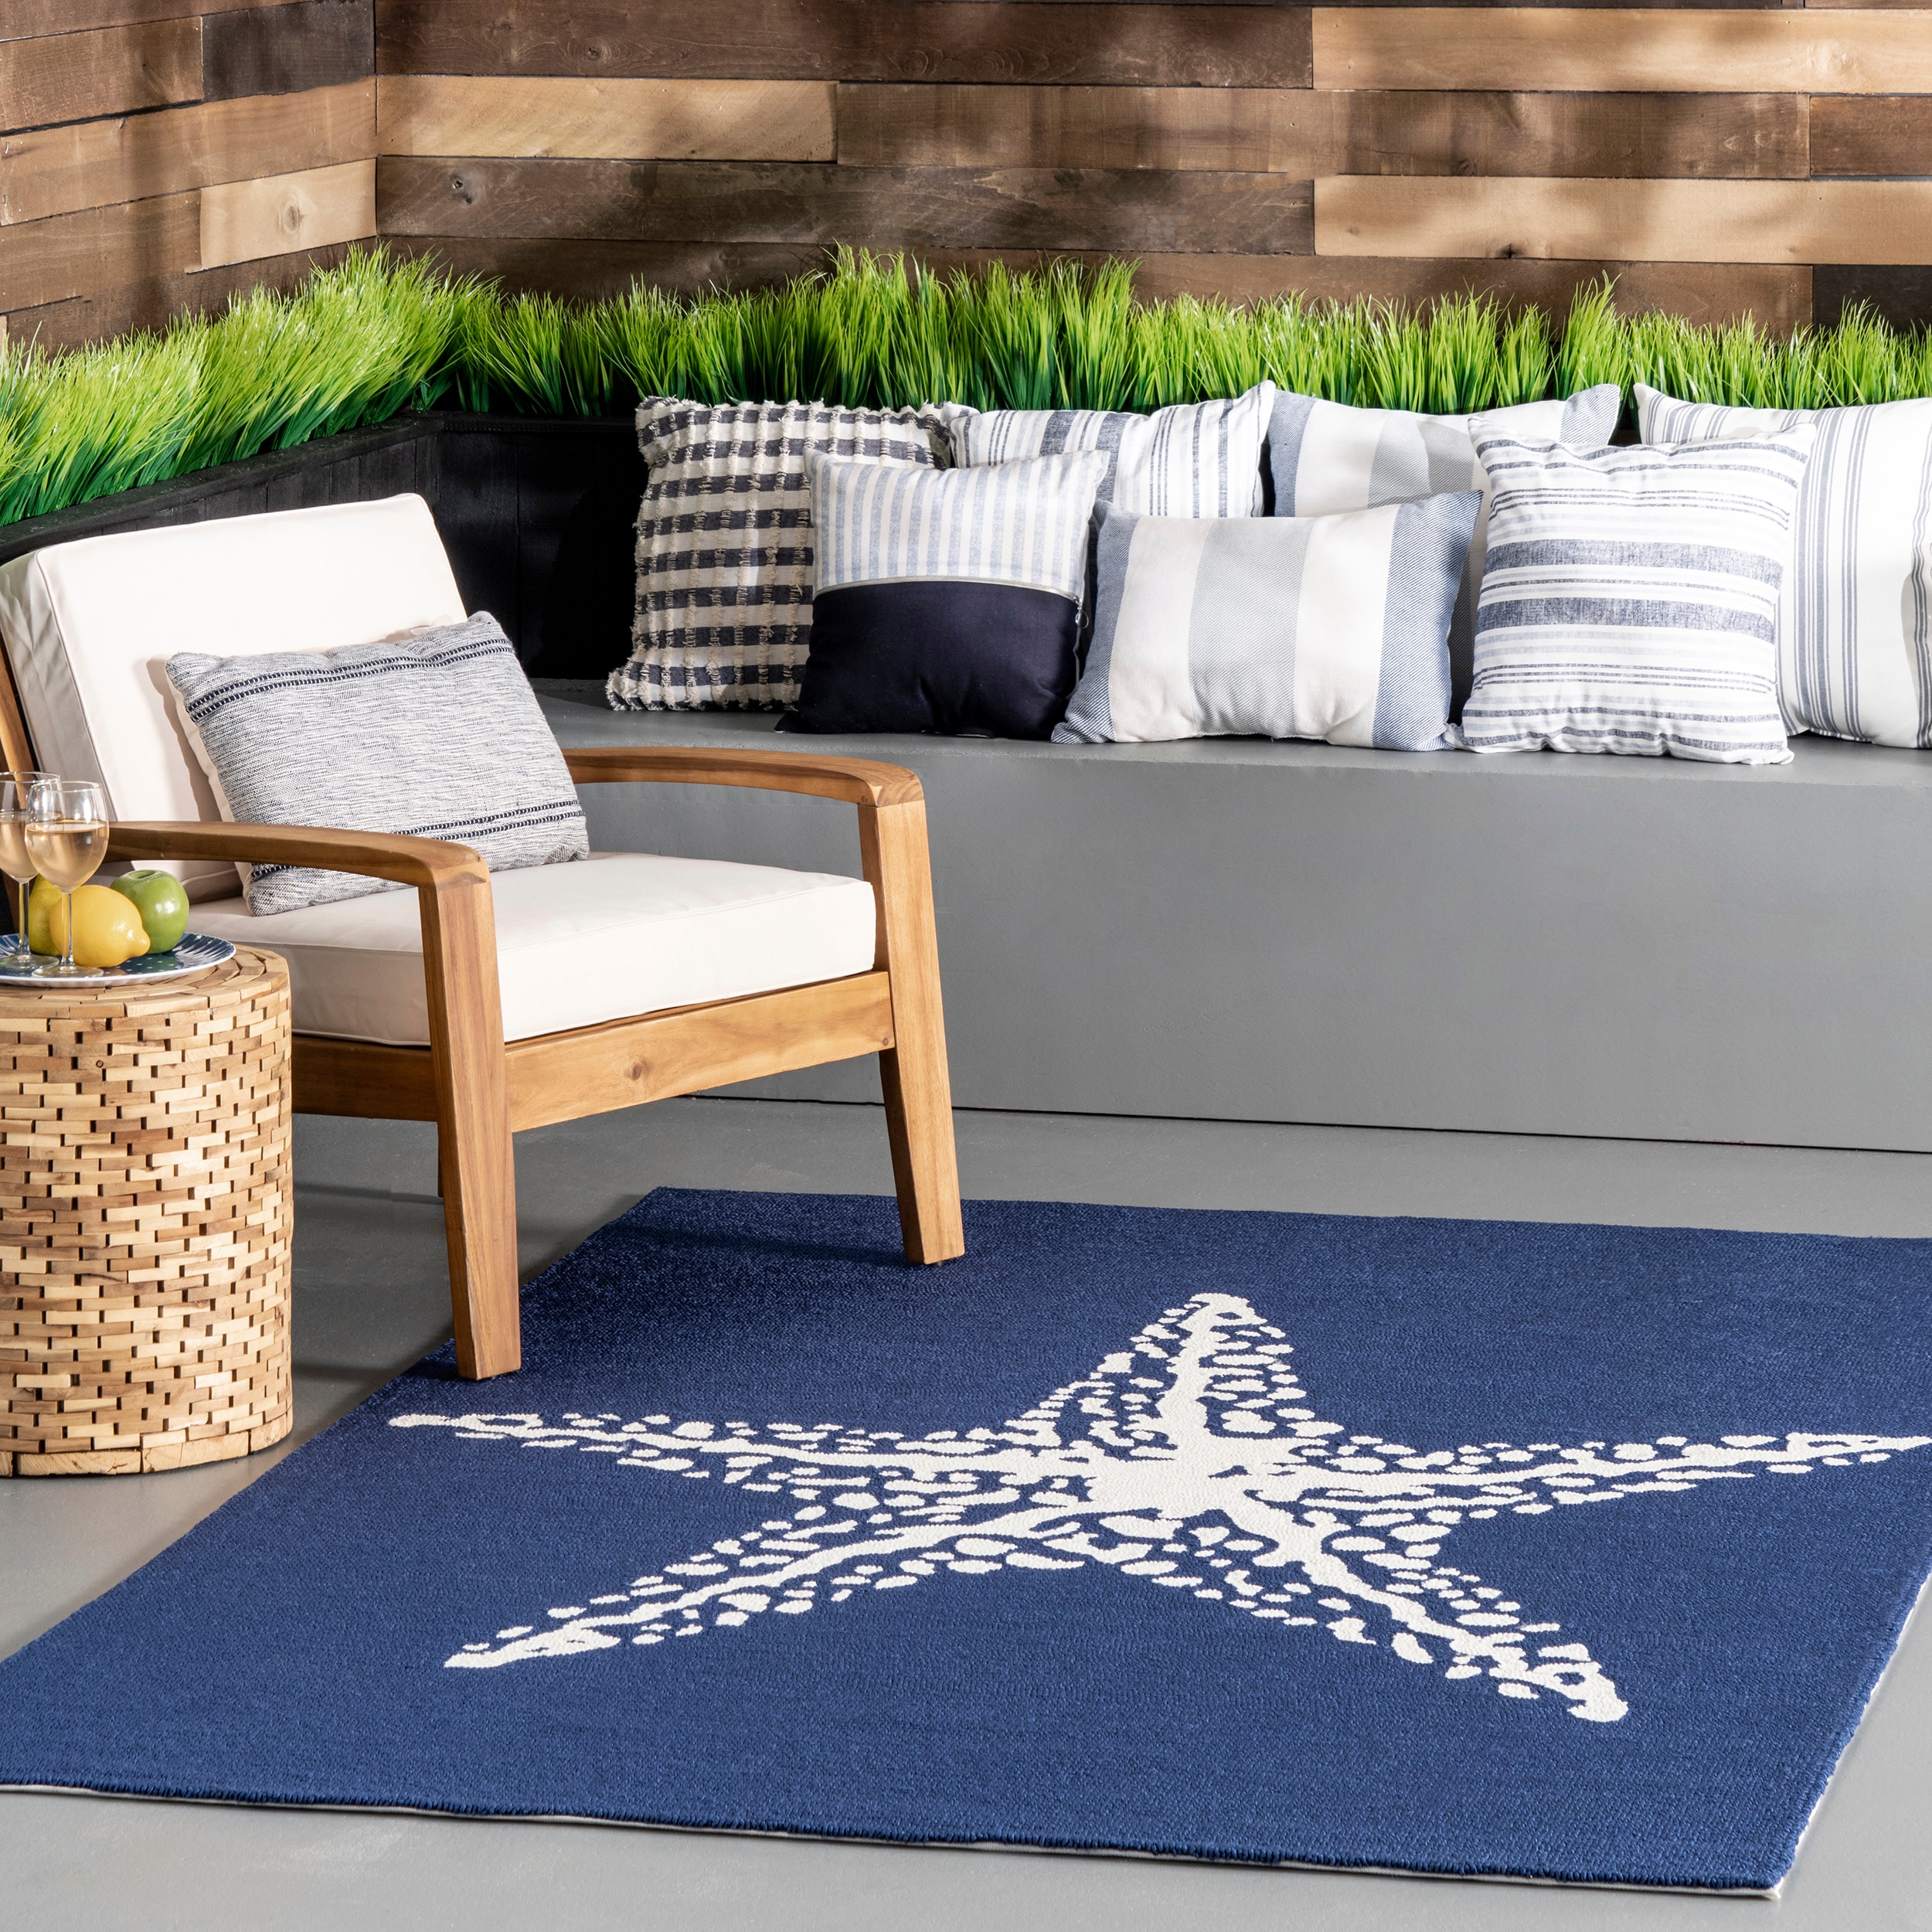 Nuloom Marine 6 X Ft Navy Square Indoor Outdoor Animal Print Area Rug In The Rugs Department At Lowes Com